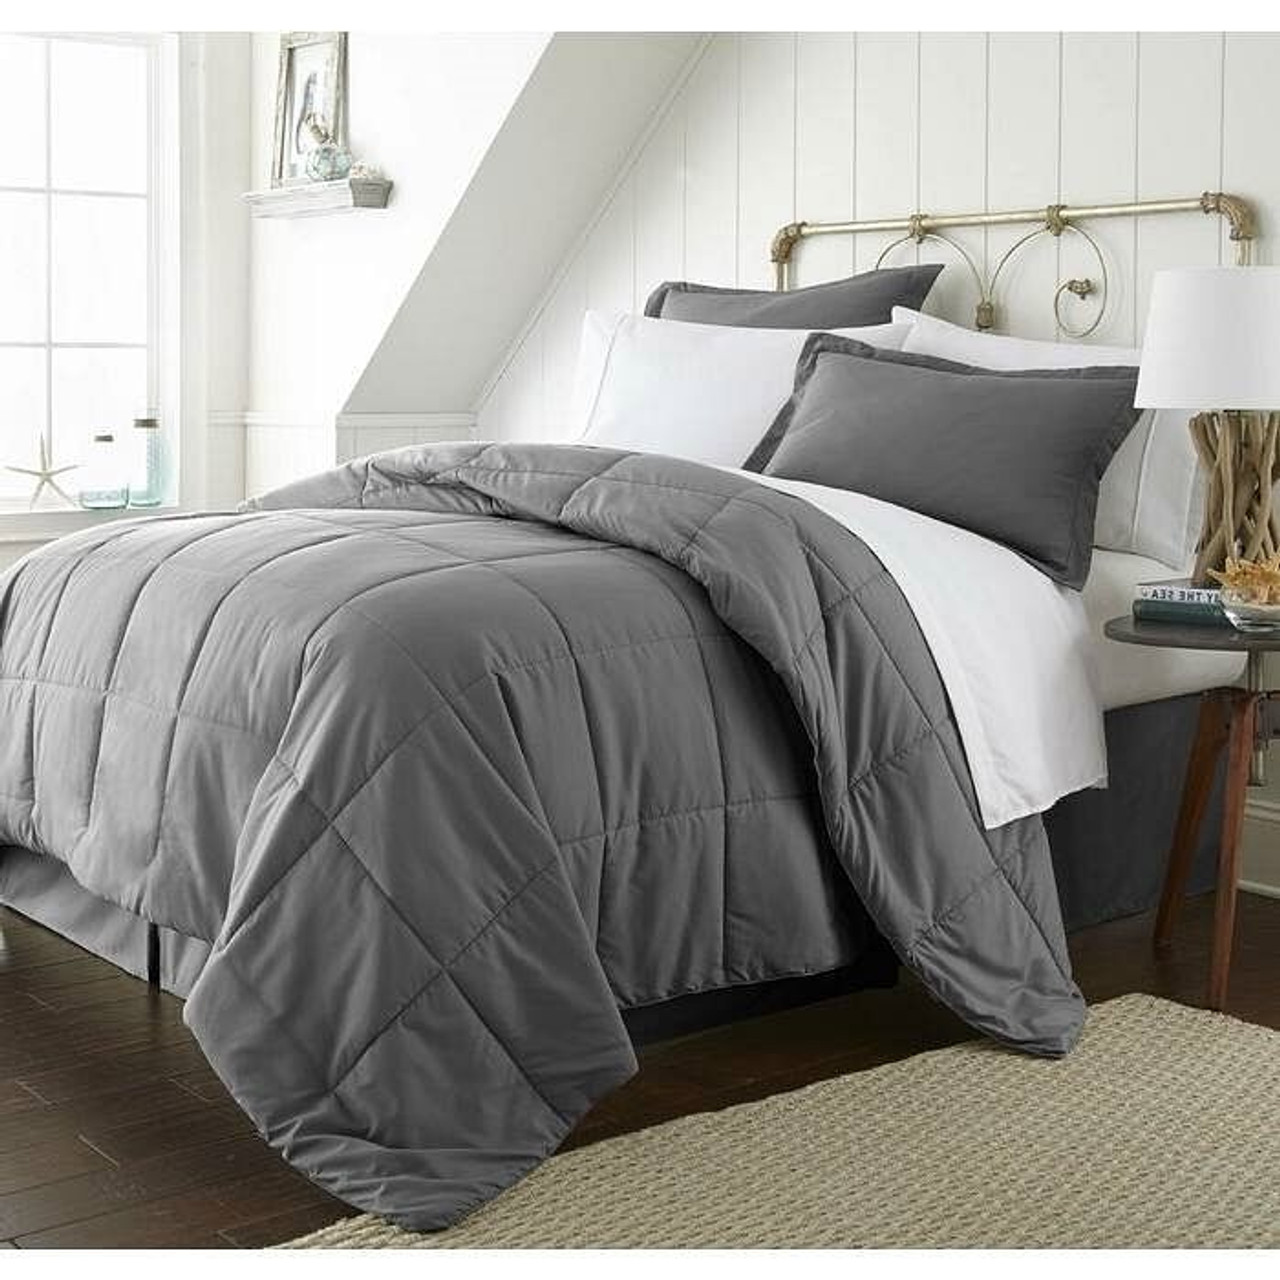 King Size 8-Piece Microfiber Reversible Bed-in-a-Bag Comforter Set in Grey